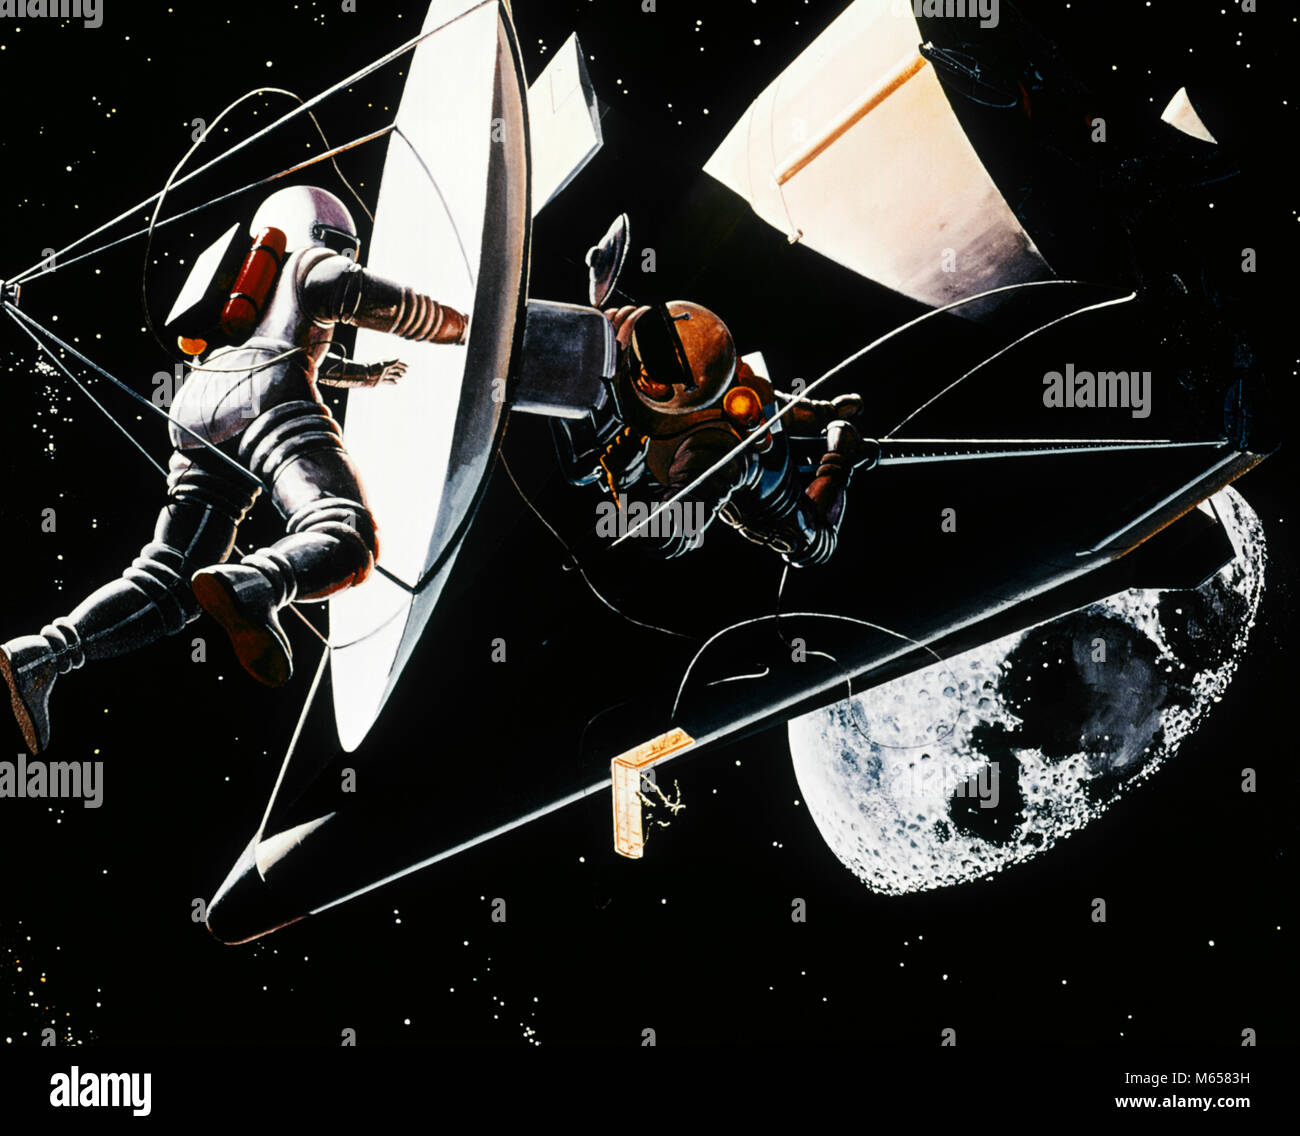 1960s NASA ILLUSTRATION ASTRONAUTS WORKING DURING SPACE SHIP EVA WEARING SPACESUITS - ka1330 HAR001 HARS LUNAR DREAMS NASA OCCUPATION ADVENTURE ENVIRONMENT PROTECTION ASTRONAUTS SCIENTIFIC EXCITEMENT OCCASION INNOVATION CONNECTION HIGH TECH CONCEPTUAL COOPERATION SPACE SUIT IMAGINATION MOBILITY OUTER SPACE SCI-FI HIGH-TECH MALES PRECISION SCIENCE FICTION SPACE TRAVEL SPACESHIP DISKS DURING EVA EXTRA VEHICULAR ACTIVITY OCCUPATIONS OLD FASHIONED PERSONS SCIFI SF SPACE STATION Stock Photo